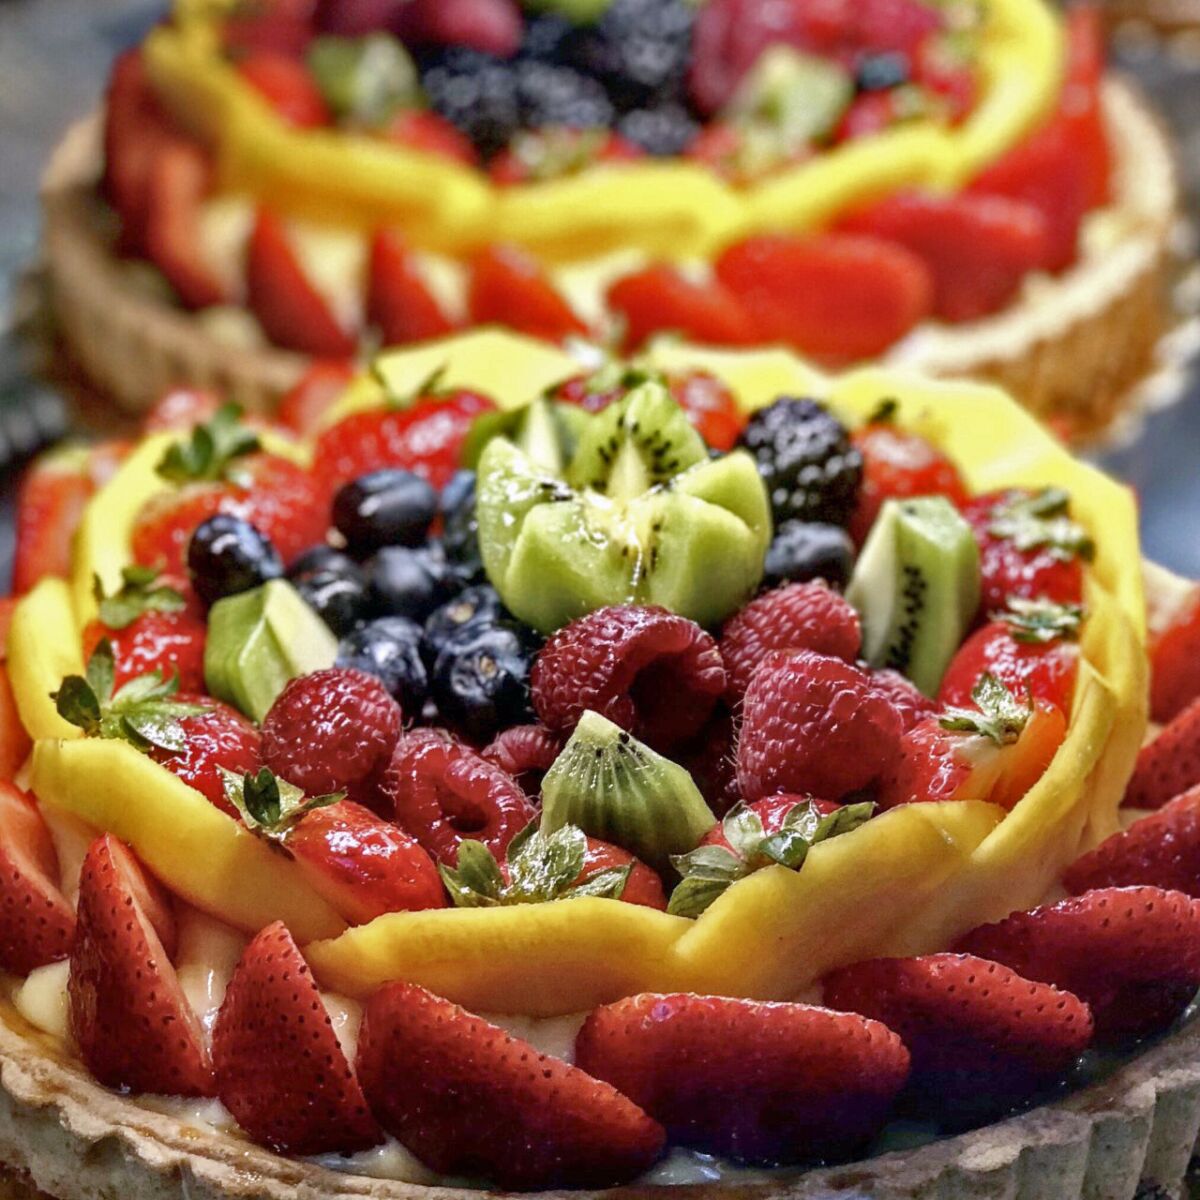 Fruit tarts from Creme Bakery in Claremont, Calif.